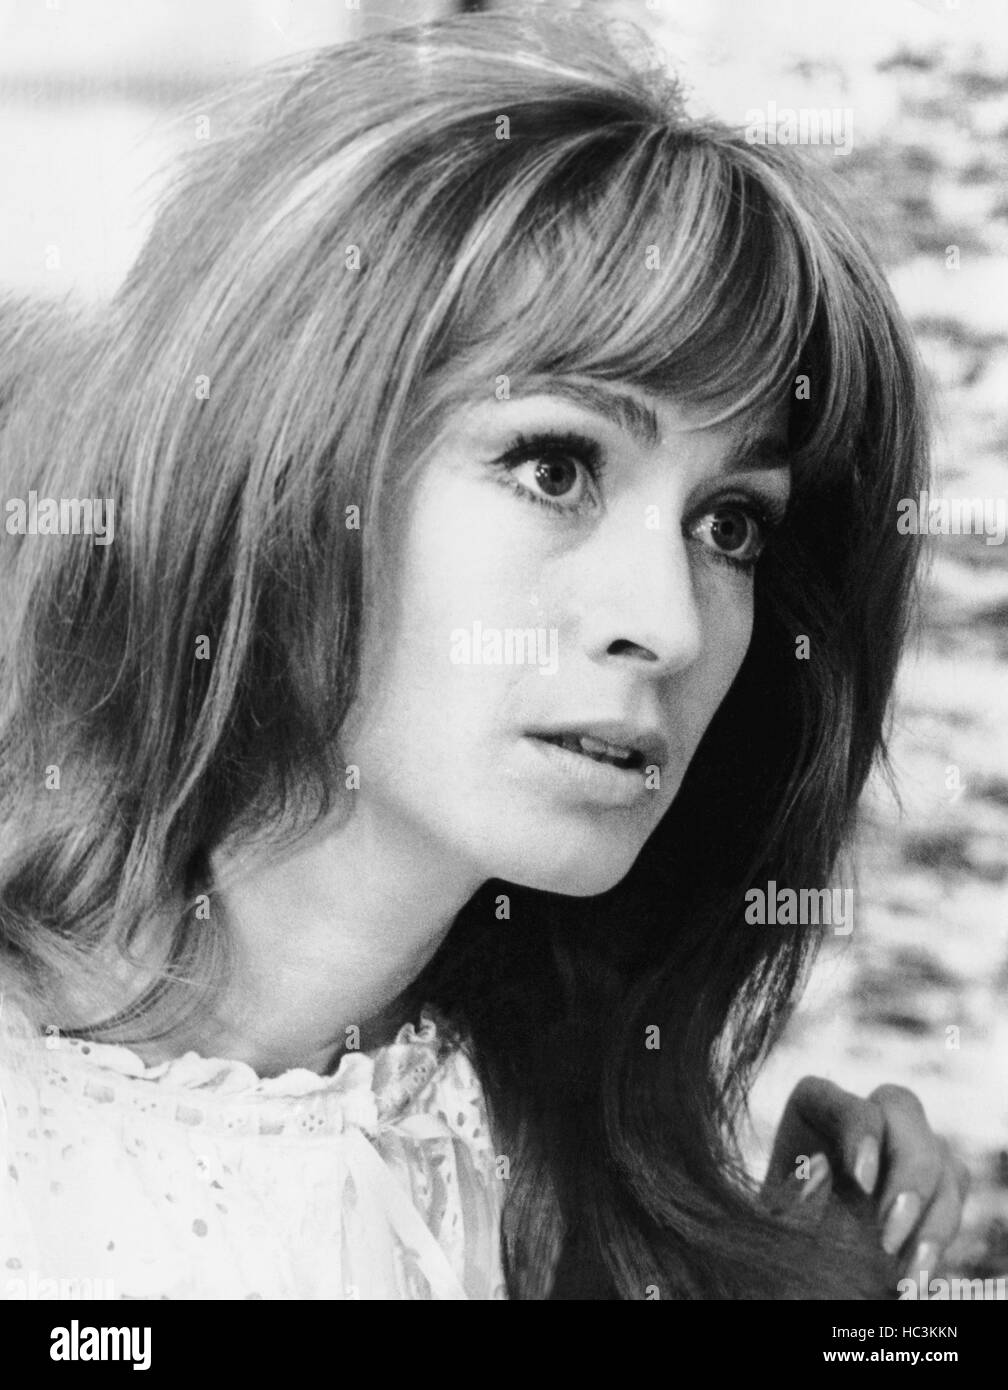 THE PENTHOUSE, Suzy Kendall, 1967 Stock Photo - Alamy